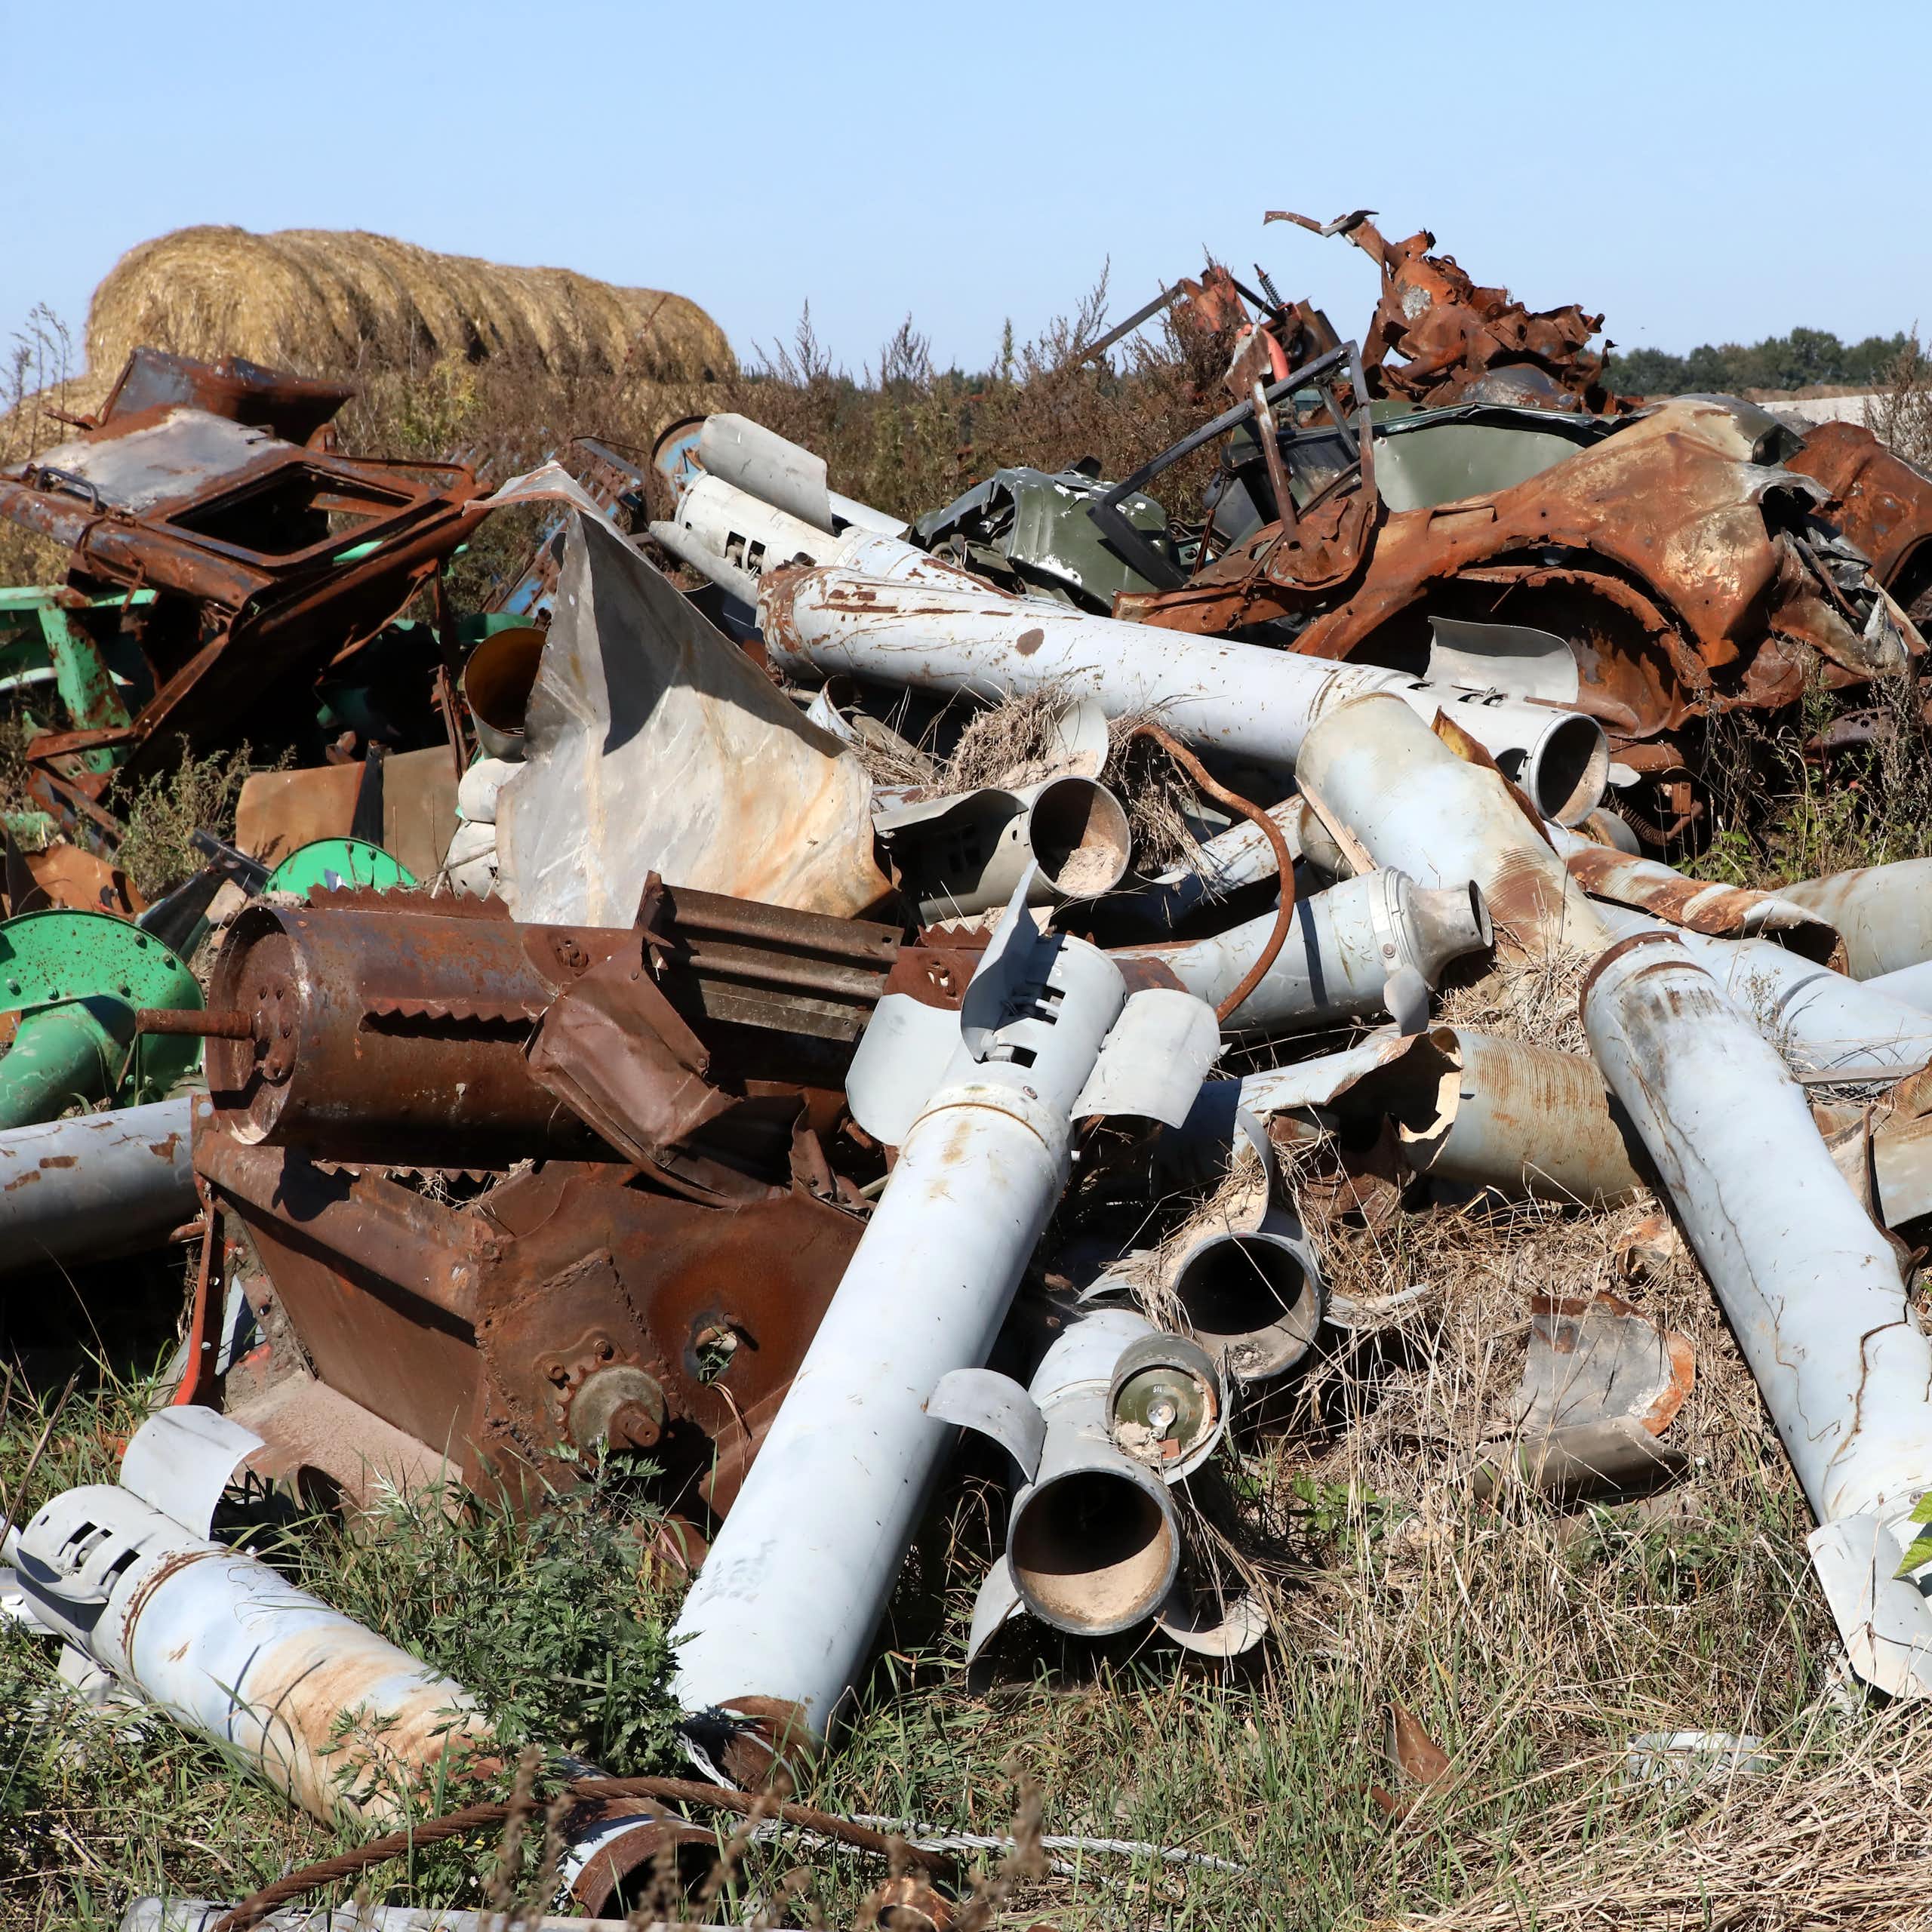 A heap of twisted metal tubes and rusted machinery